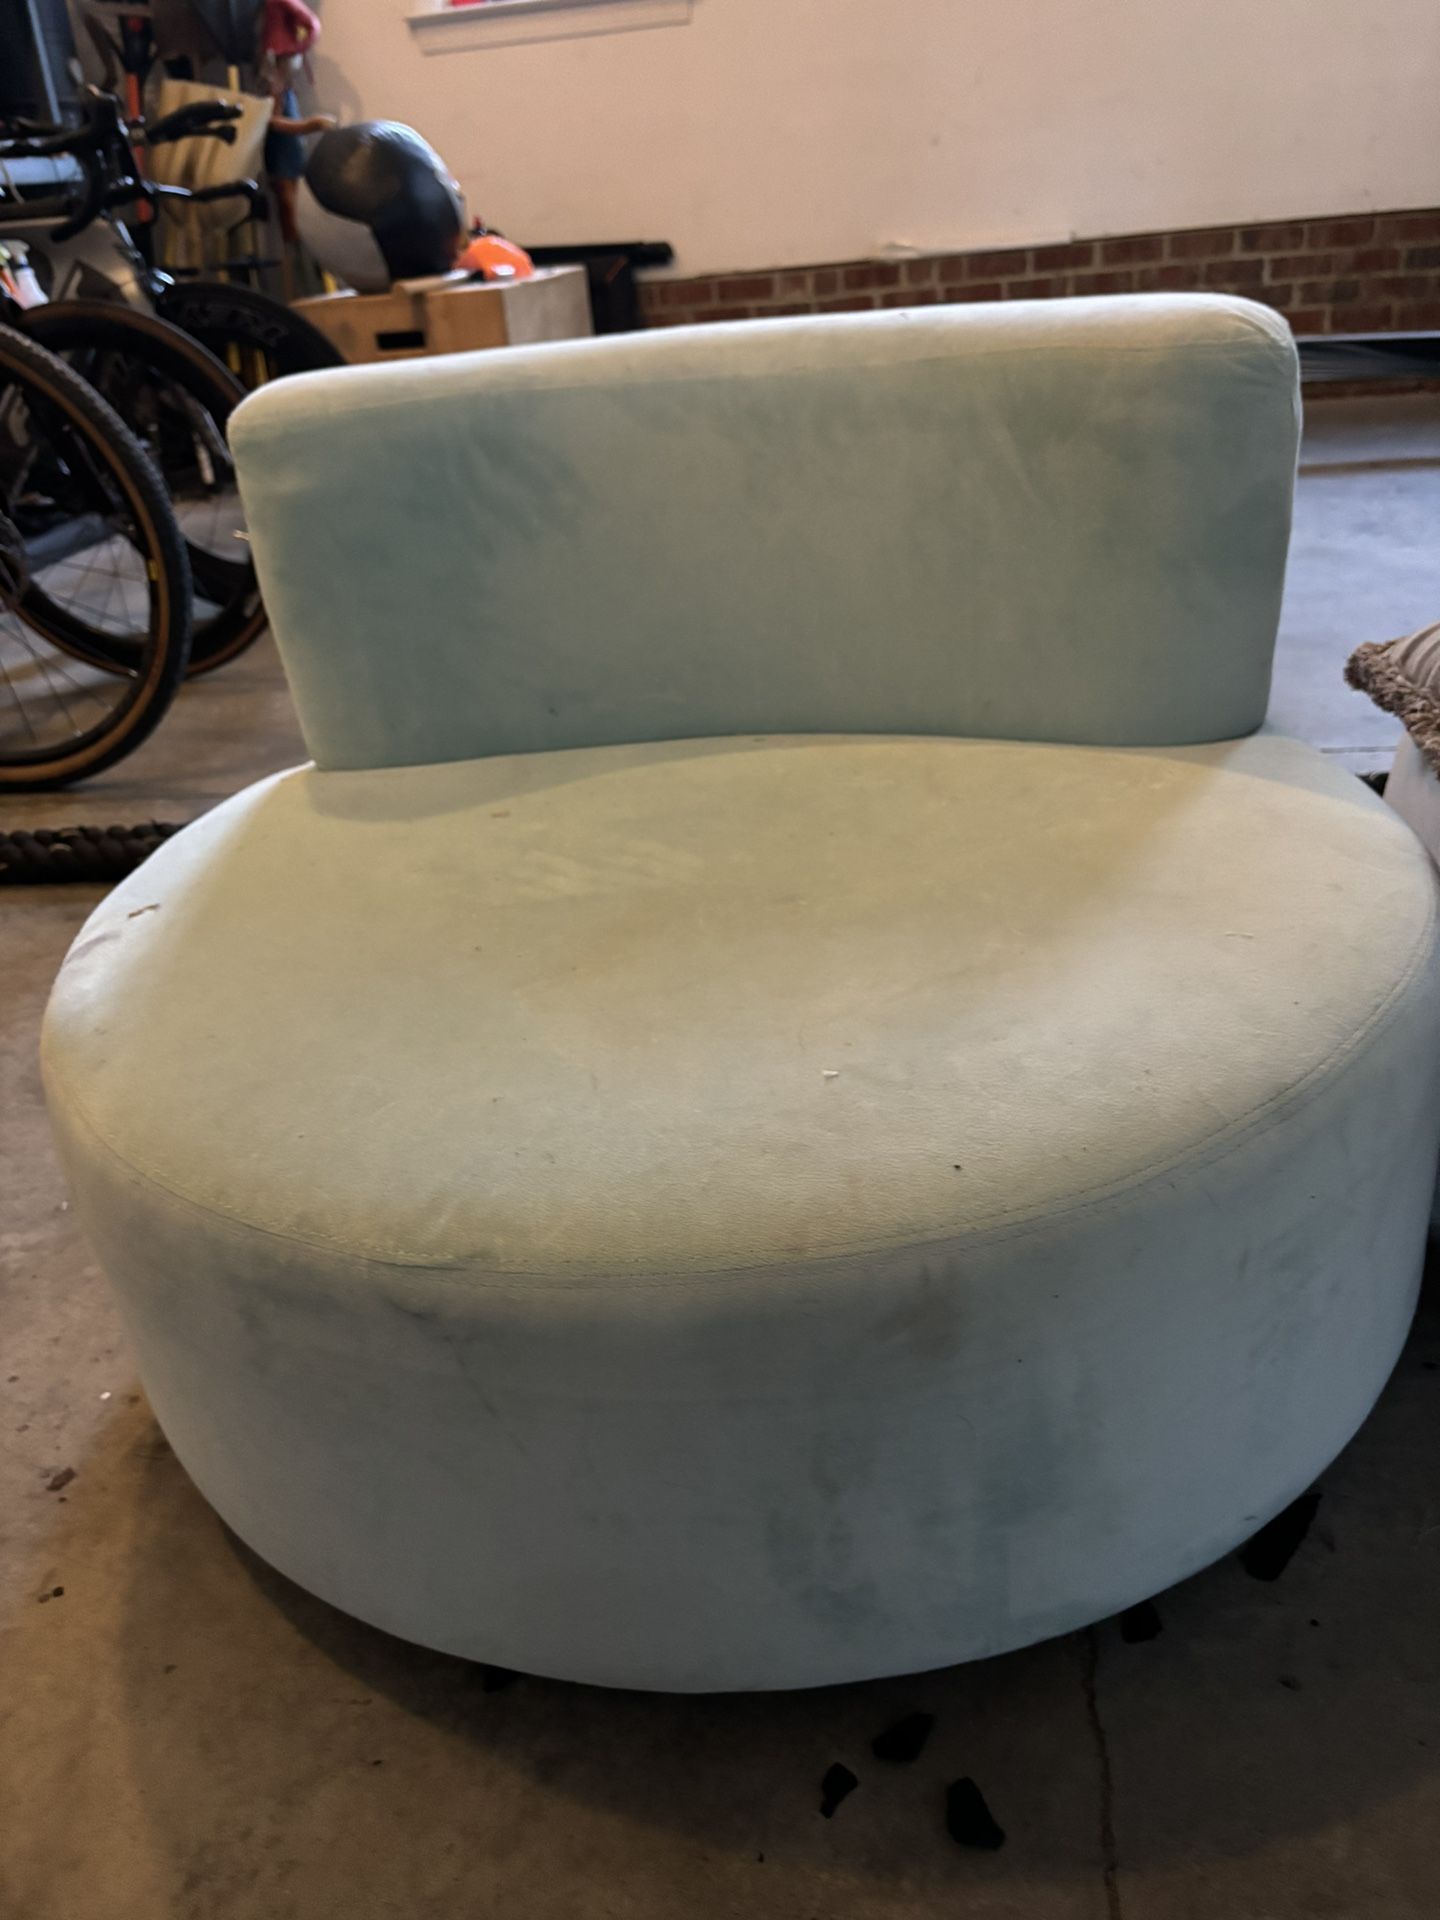 Kids Swivel Chair - Light Blue - Free But You Have To Pick It Up. 